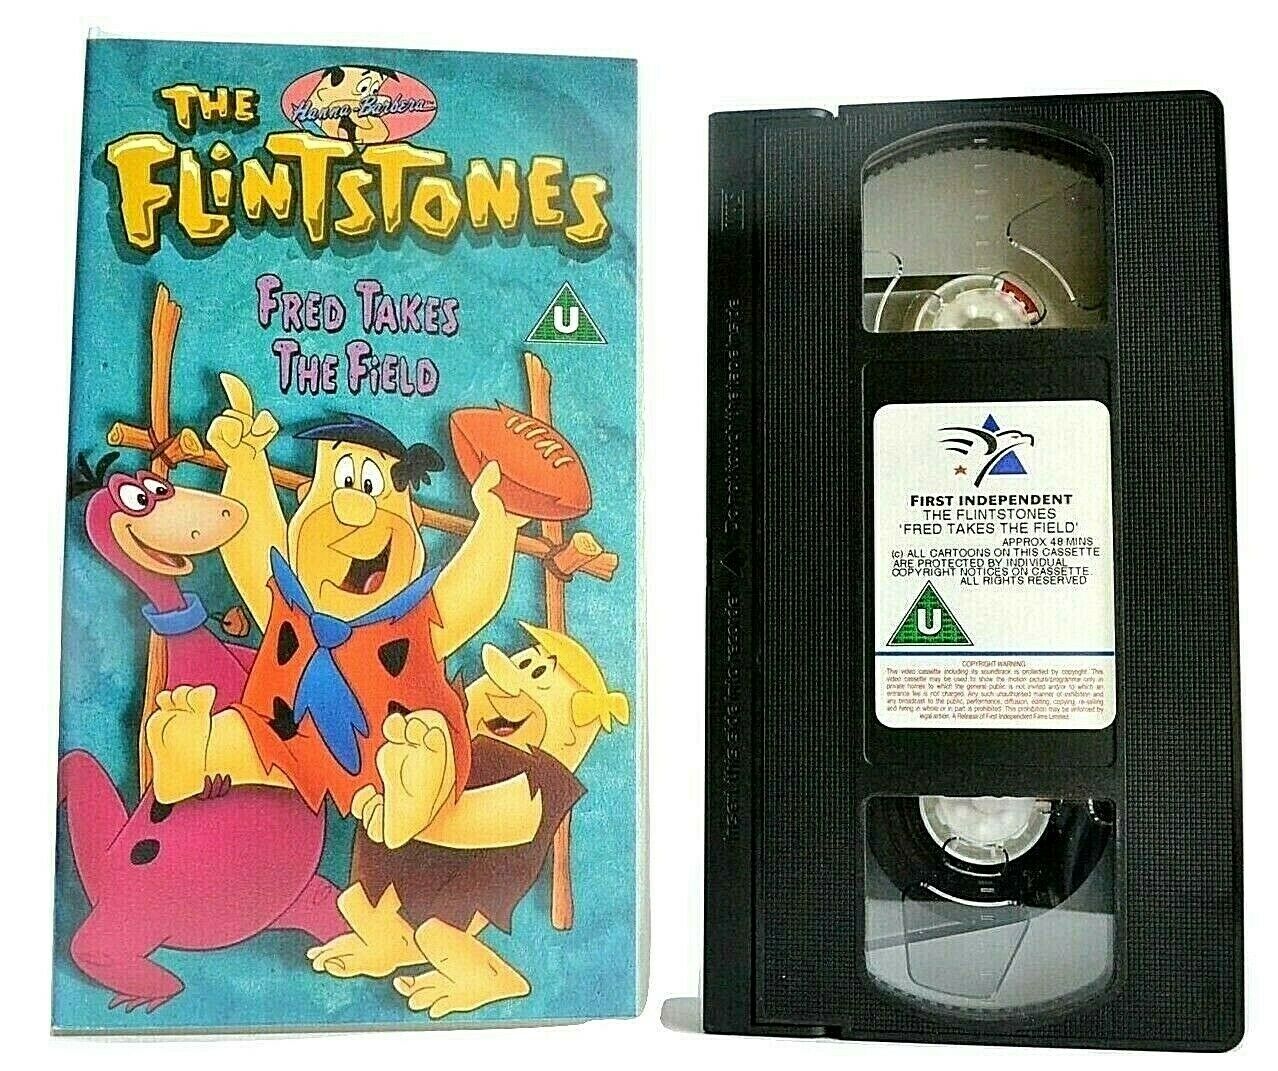 The Flintstones: Fred Takes The Field - Hanna-Barbera - Animated - Kids - VHS-